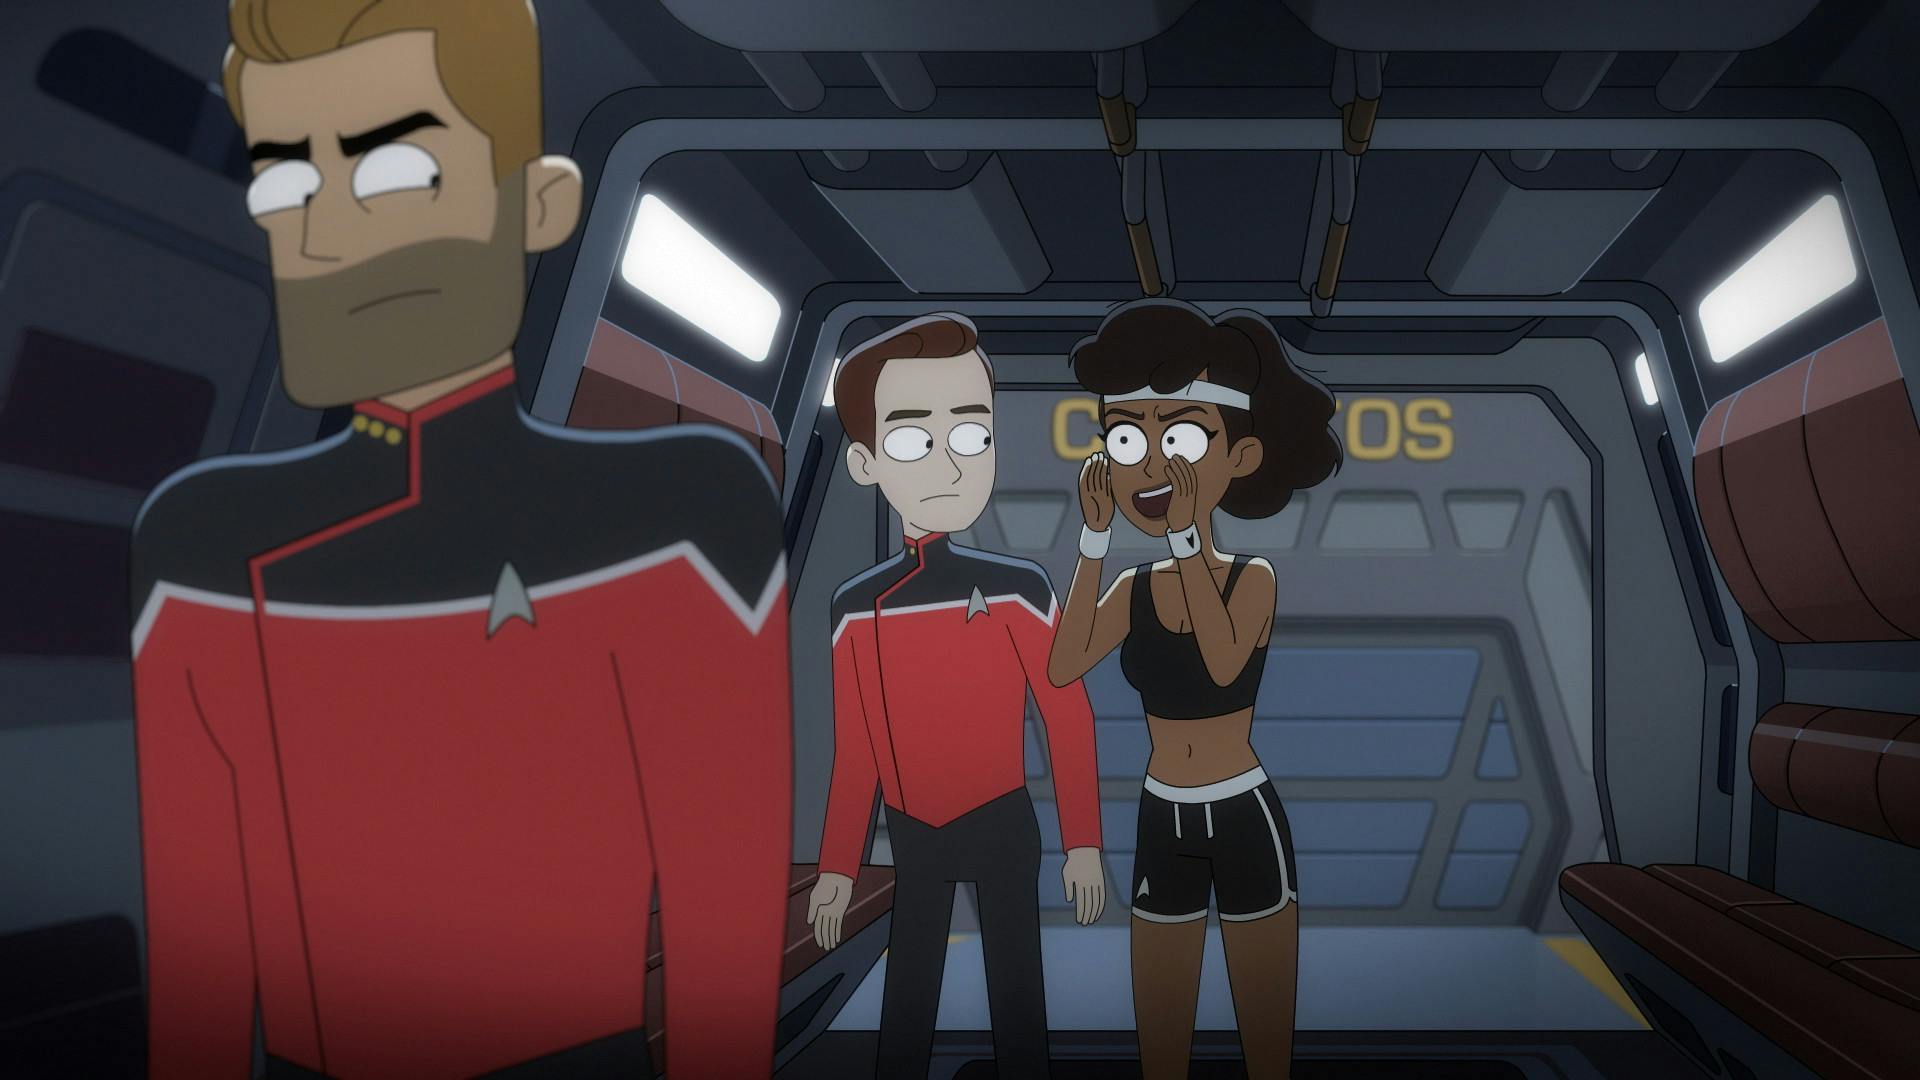 Mariner in her workout gear, standing next to Gary, shouting at Ransom who is in front of them, as seen in Star Trek: Lower Decks 402 'I Have No Bones Yet I Must Flee'